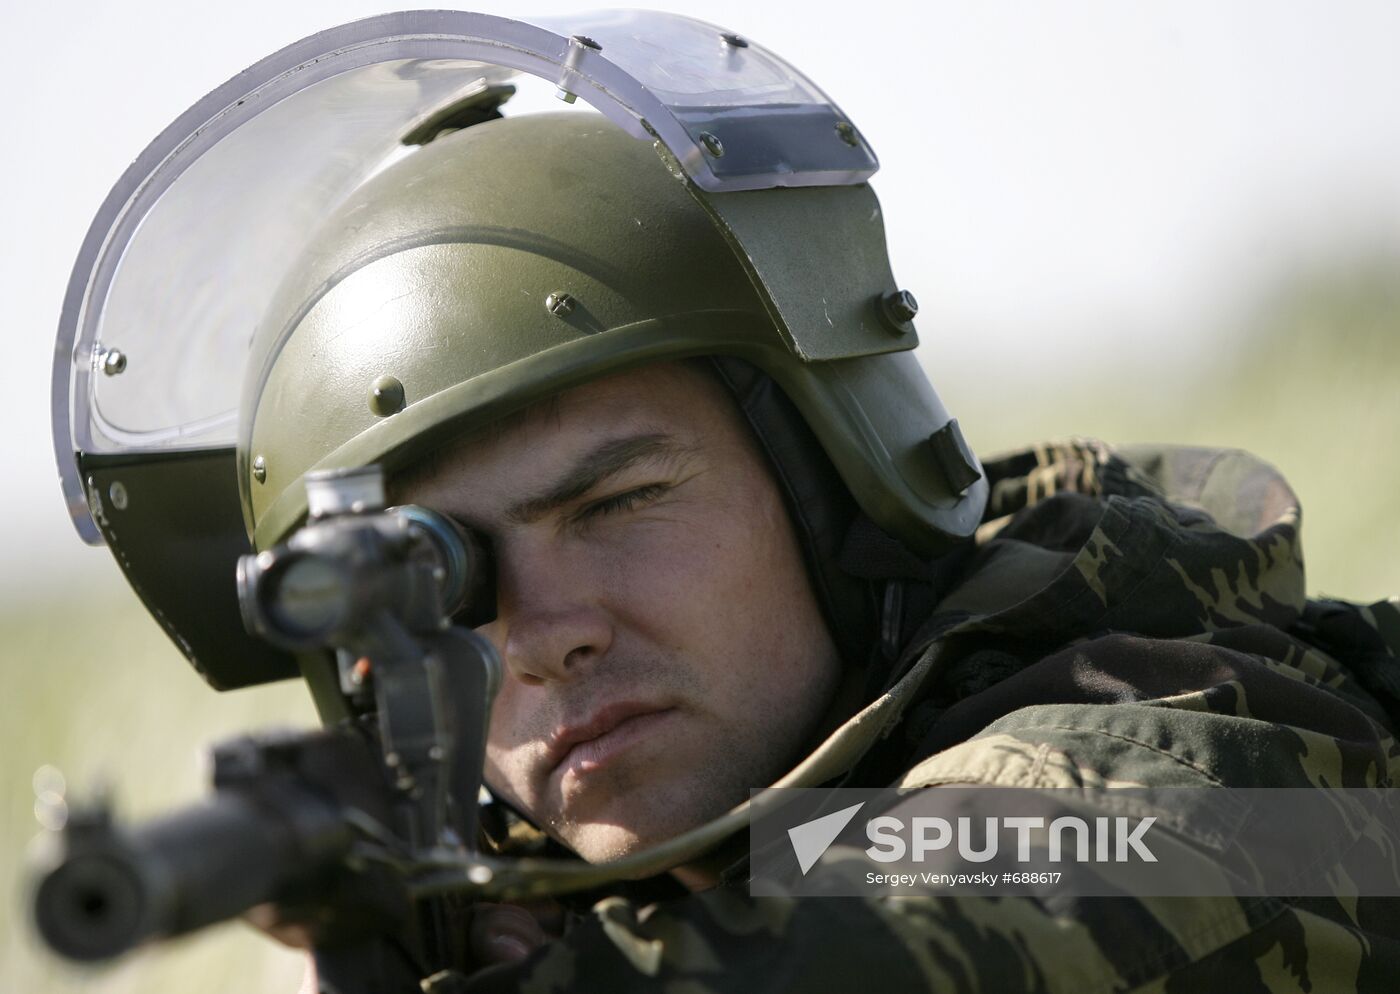 Operation of special forces of Russia's Interior Ministry Troops